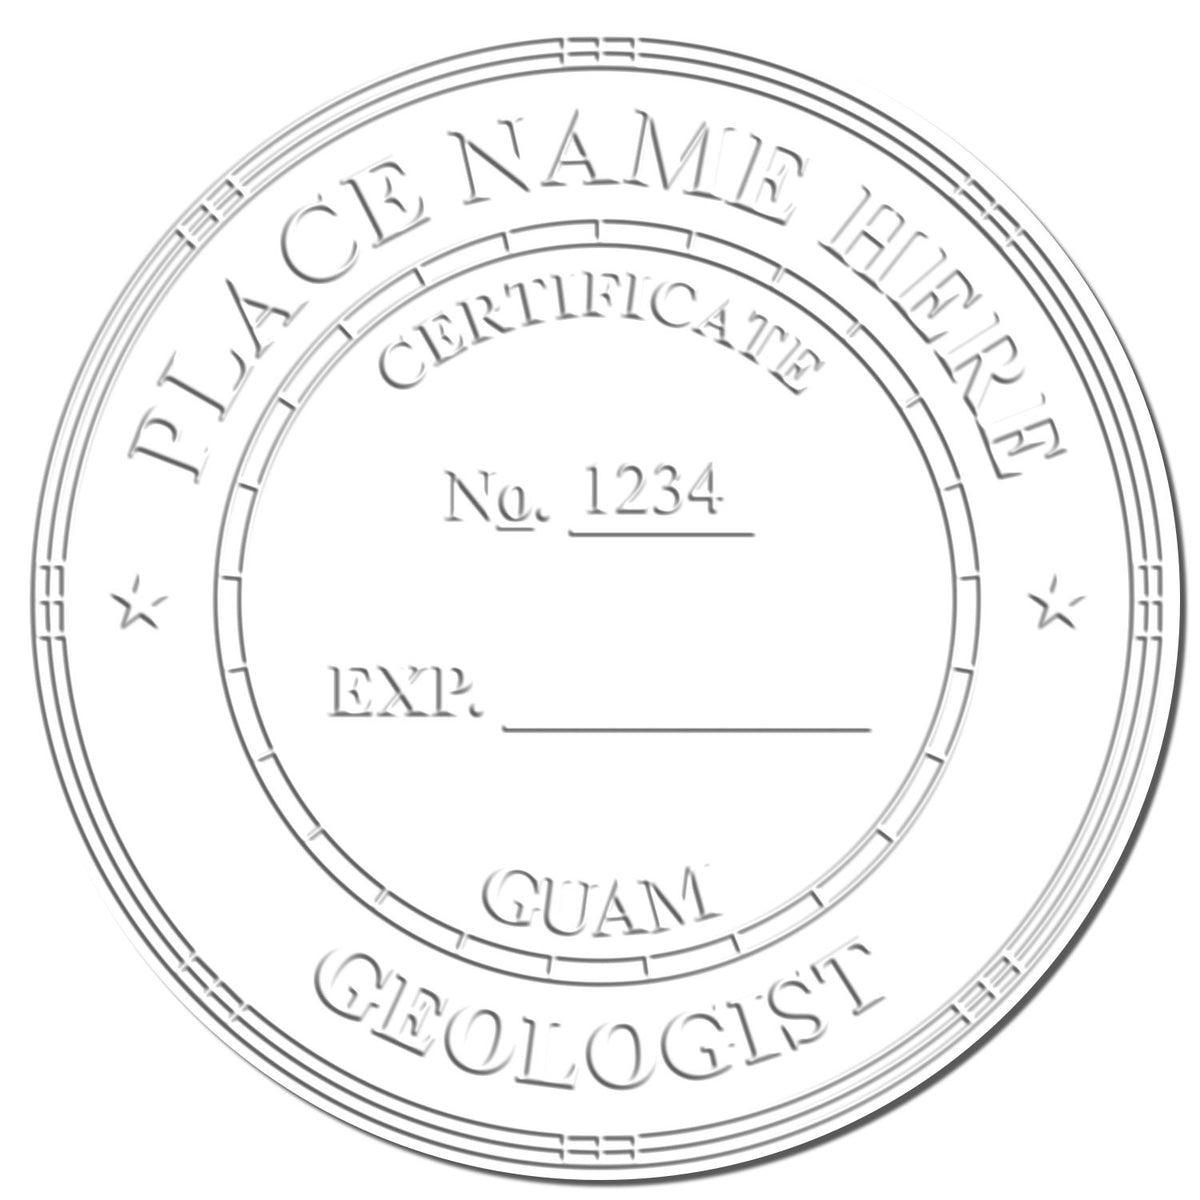 A photograph of the State of Guam Extended Long Reach Geologist Seal stamp impression reveals a vivid, professional image of the on paper.